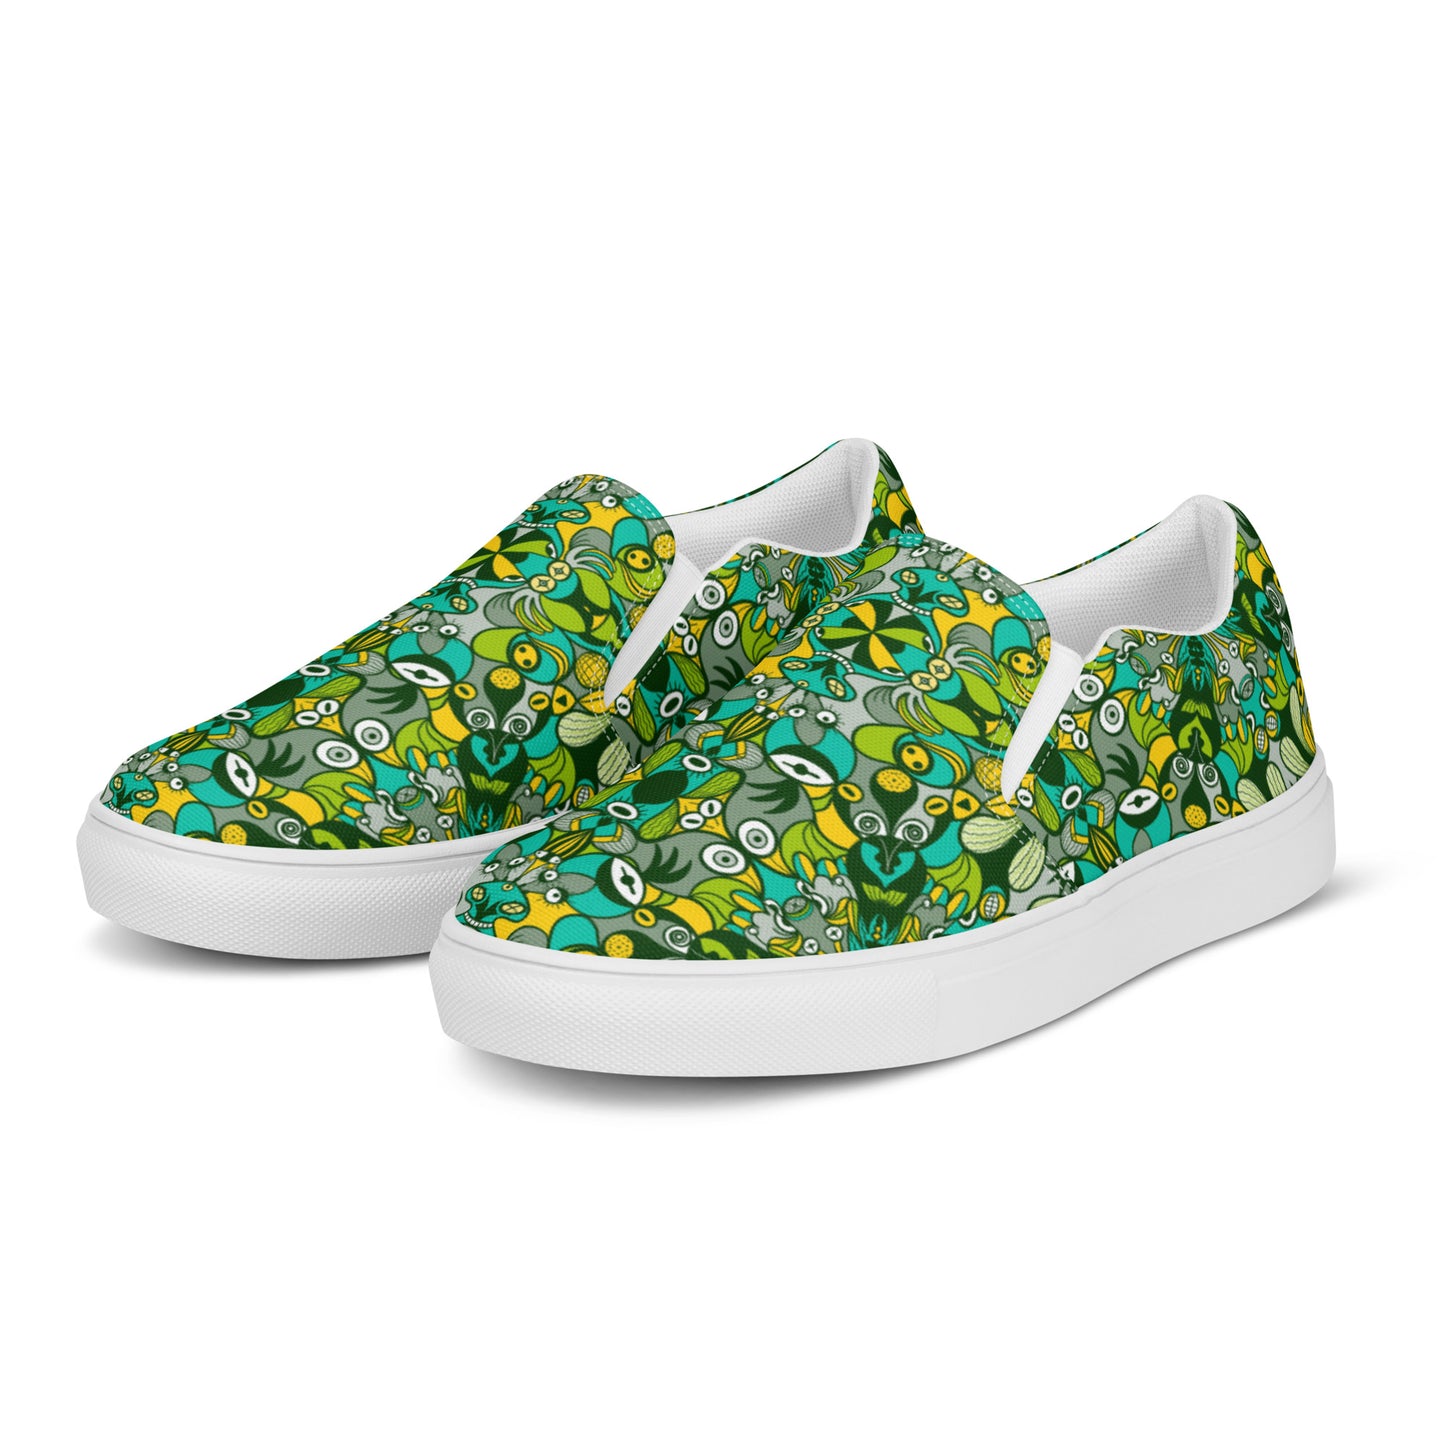 Join the funniest alien doodling network in the universe Men’s slip-on canvas shoes. Overview